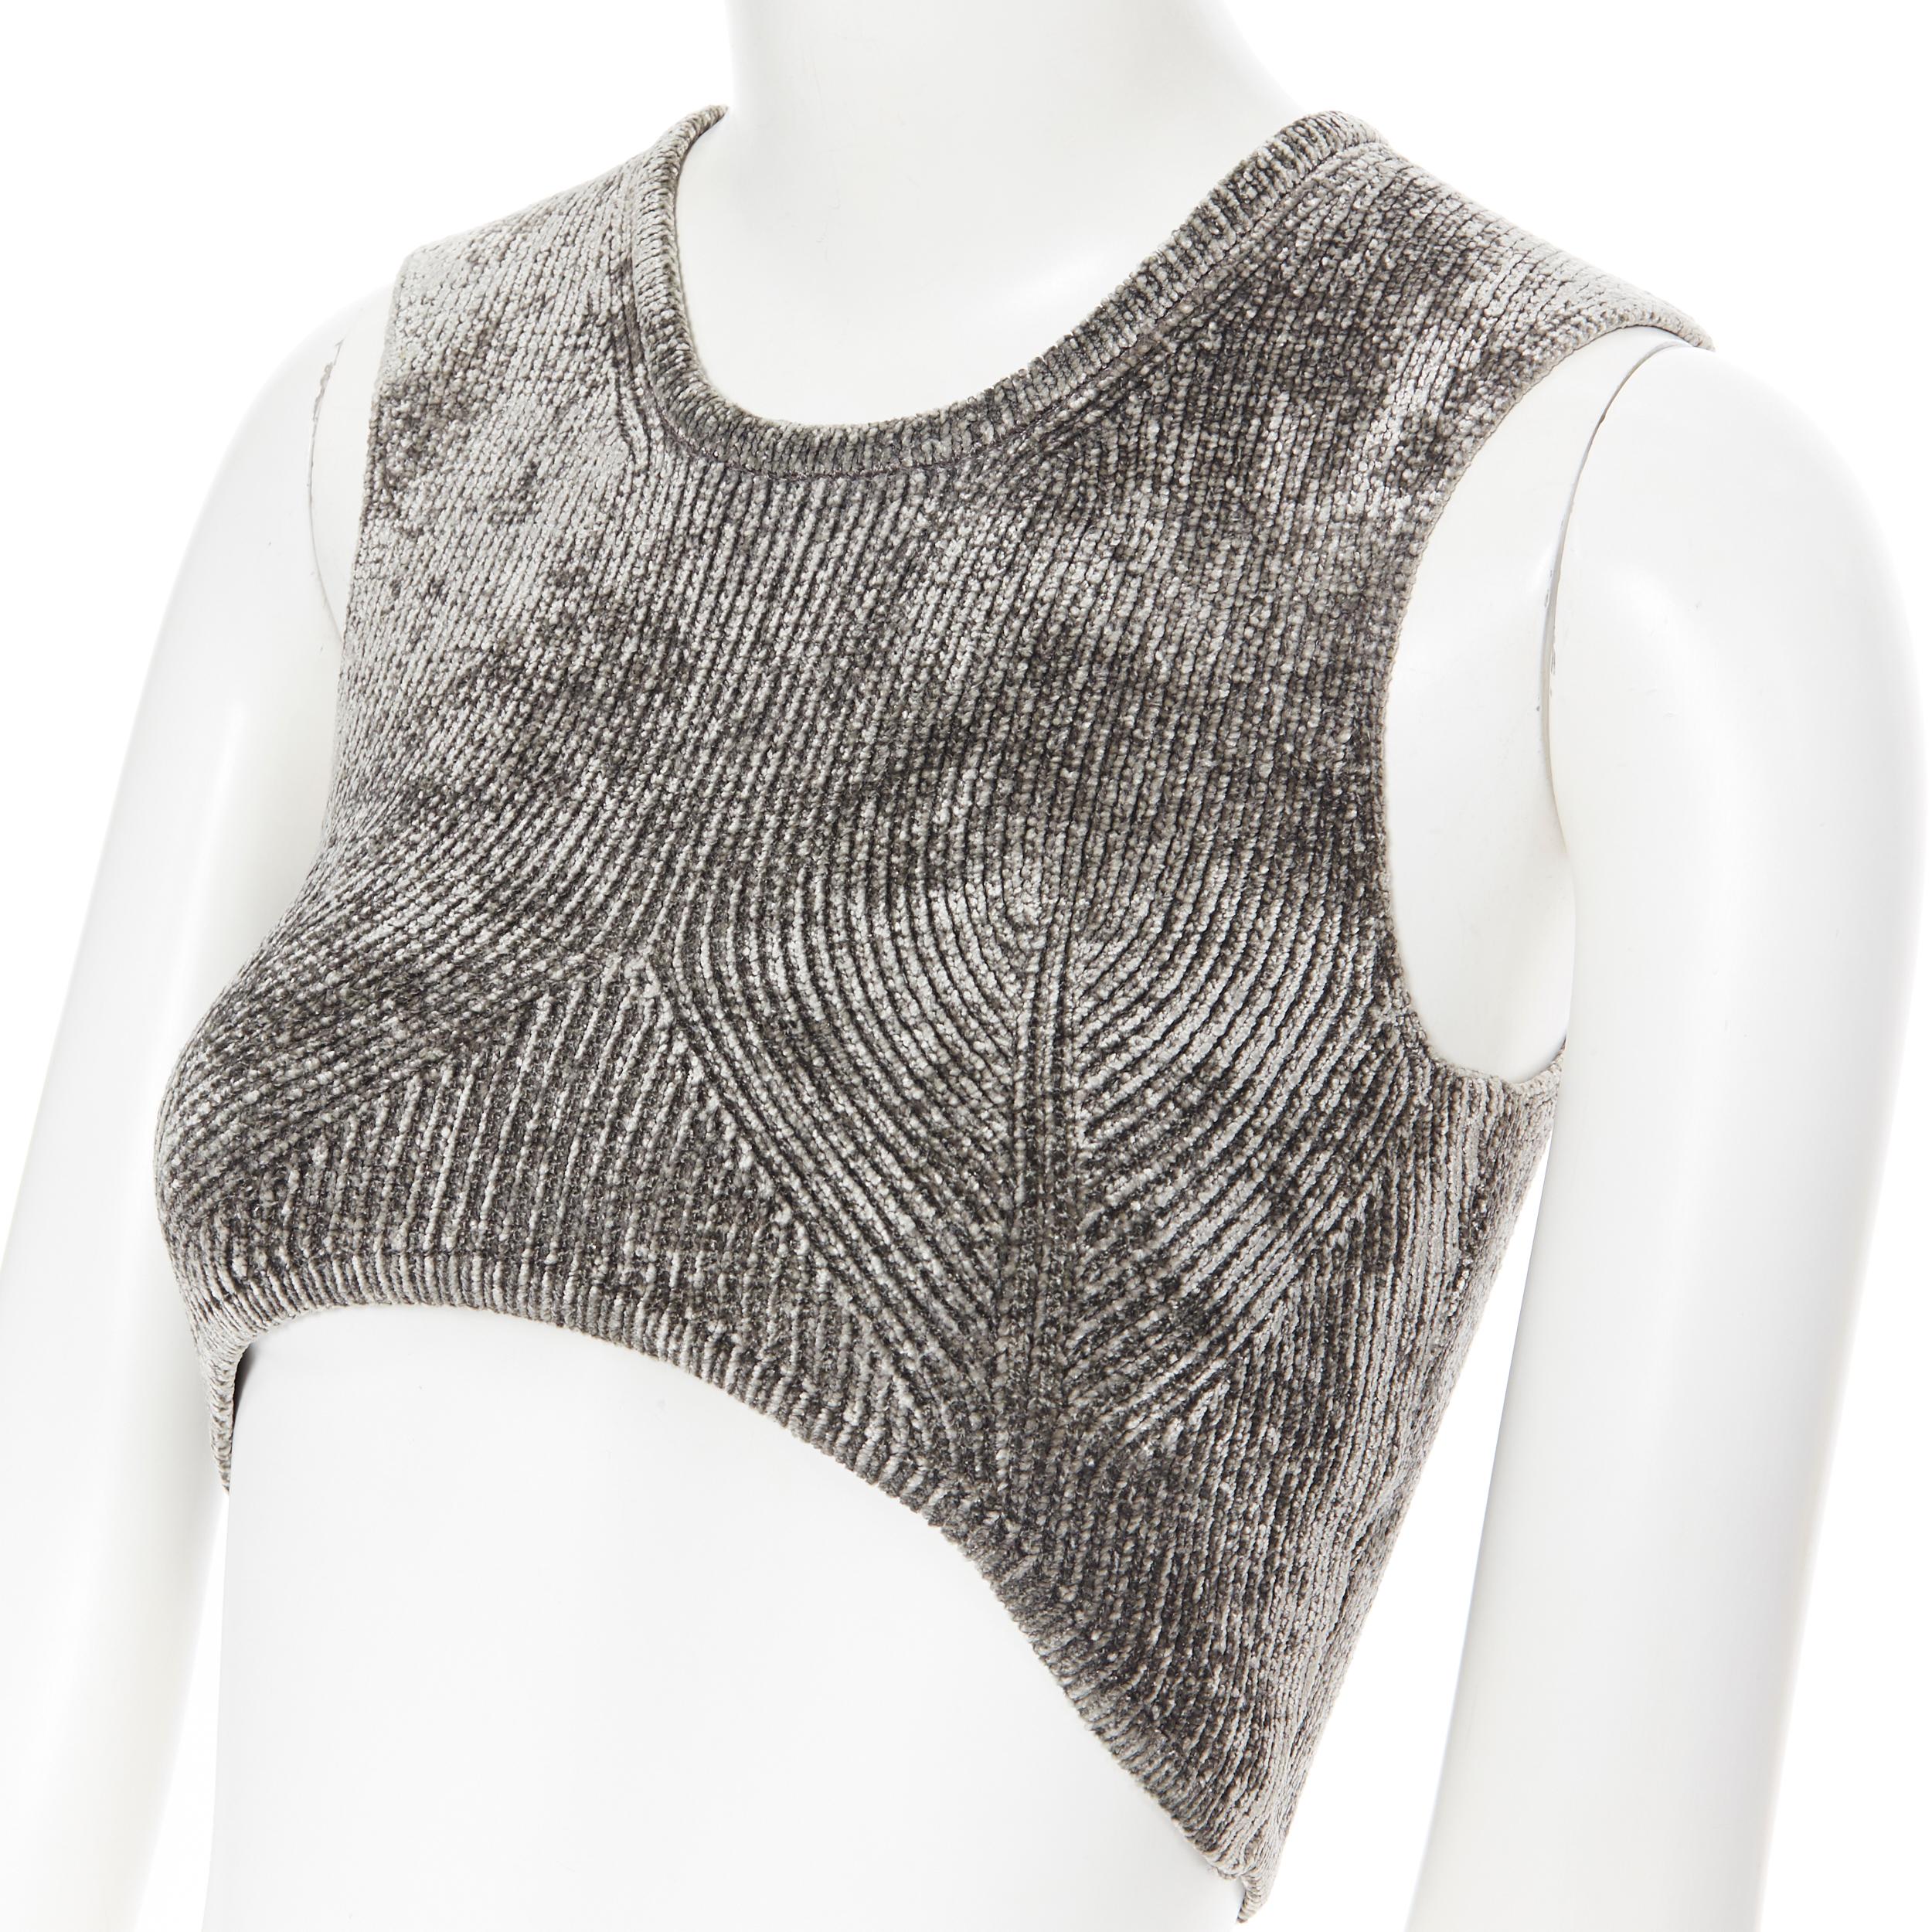 ALEXANDER WANG grey stretch velour contoured ribbing cropped bra top XS
Brand: Alexander Wang
Designer: Alexander Wang
Model Name / Style: Cropped top
Material: Viscose, nylon, spandex
Color: Grey
Pattern: Solid
Closure: Pull on
Extra Detail: